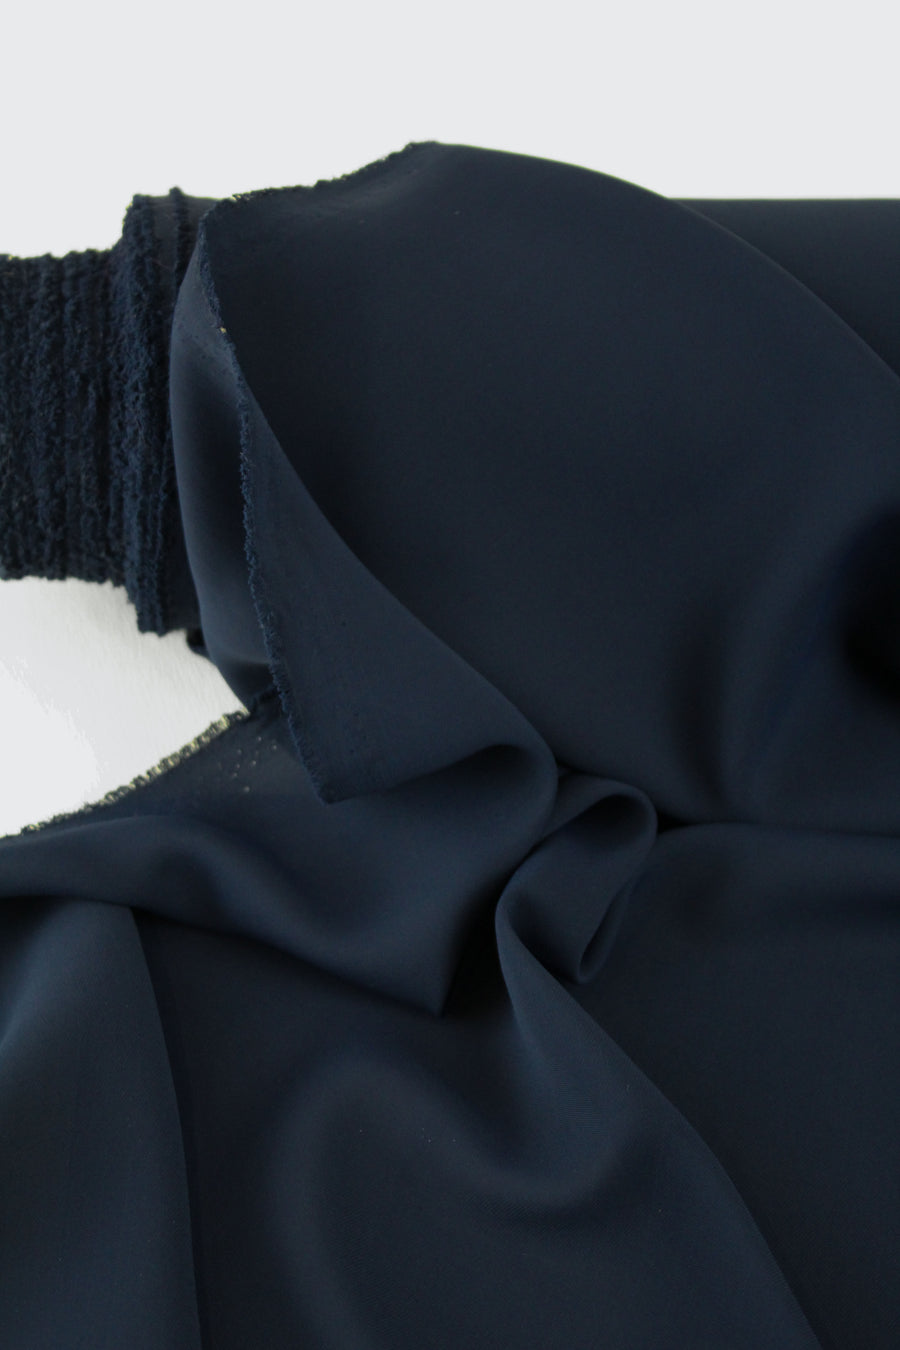 Double Woven Georgette | Navy